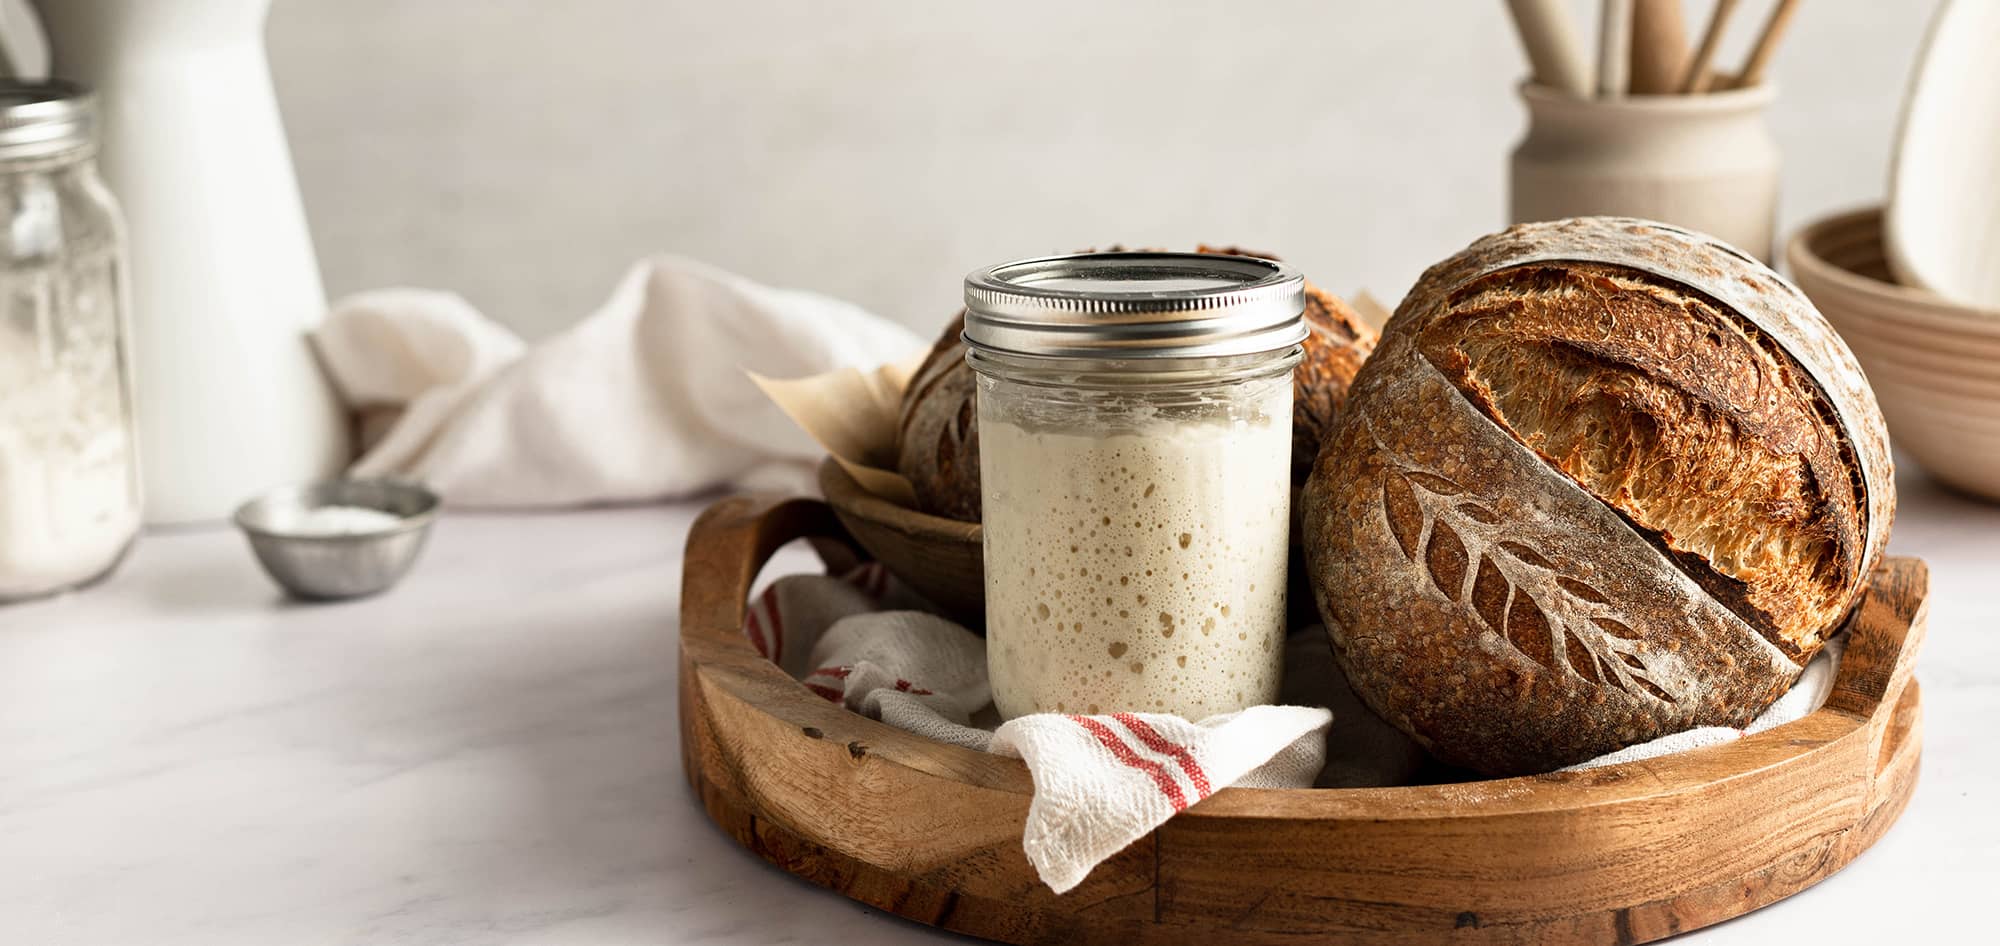 sourdough bread and a jar of sourdough starter on a wooden tray